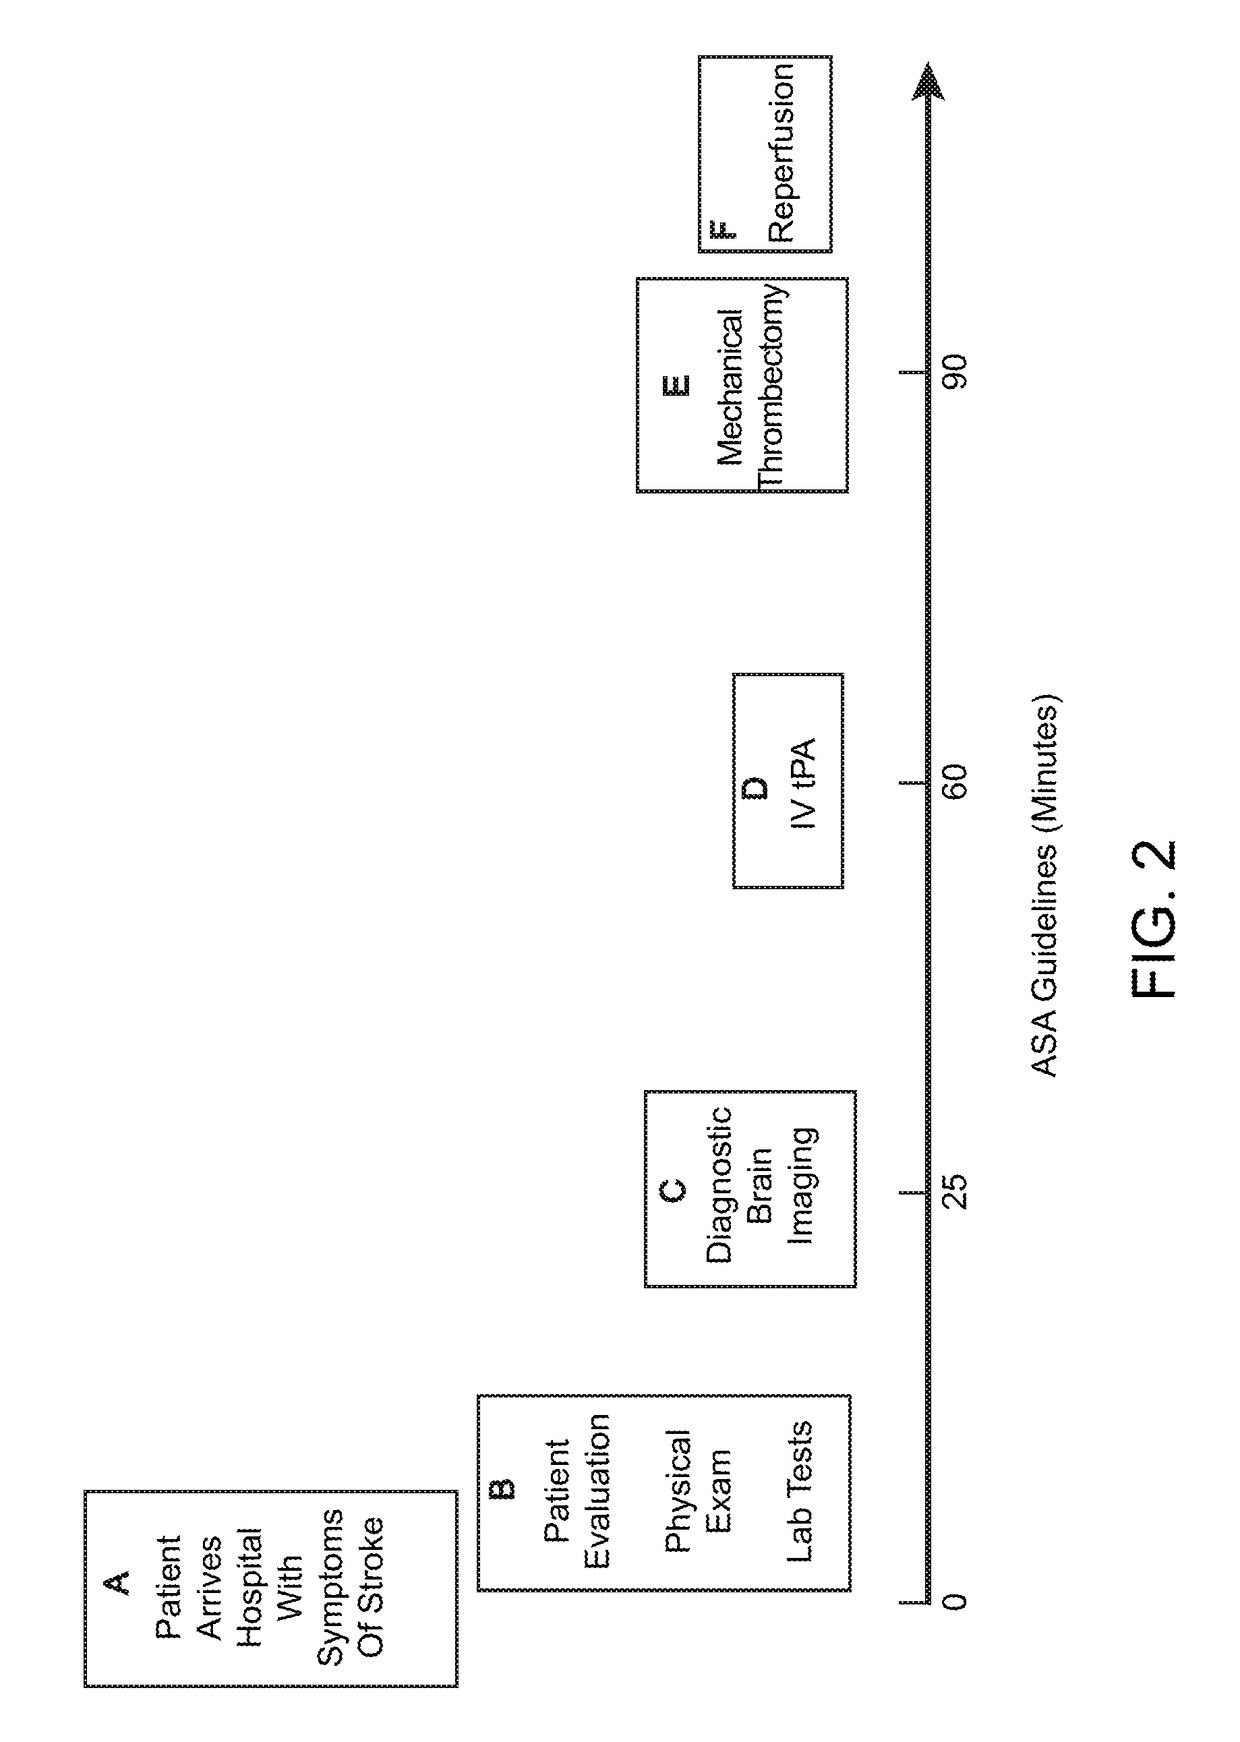 Systems and methods for treatment of stroke